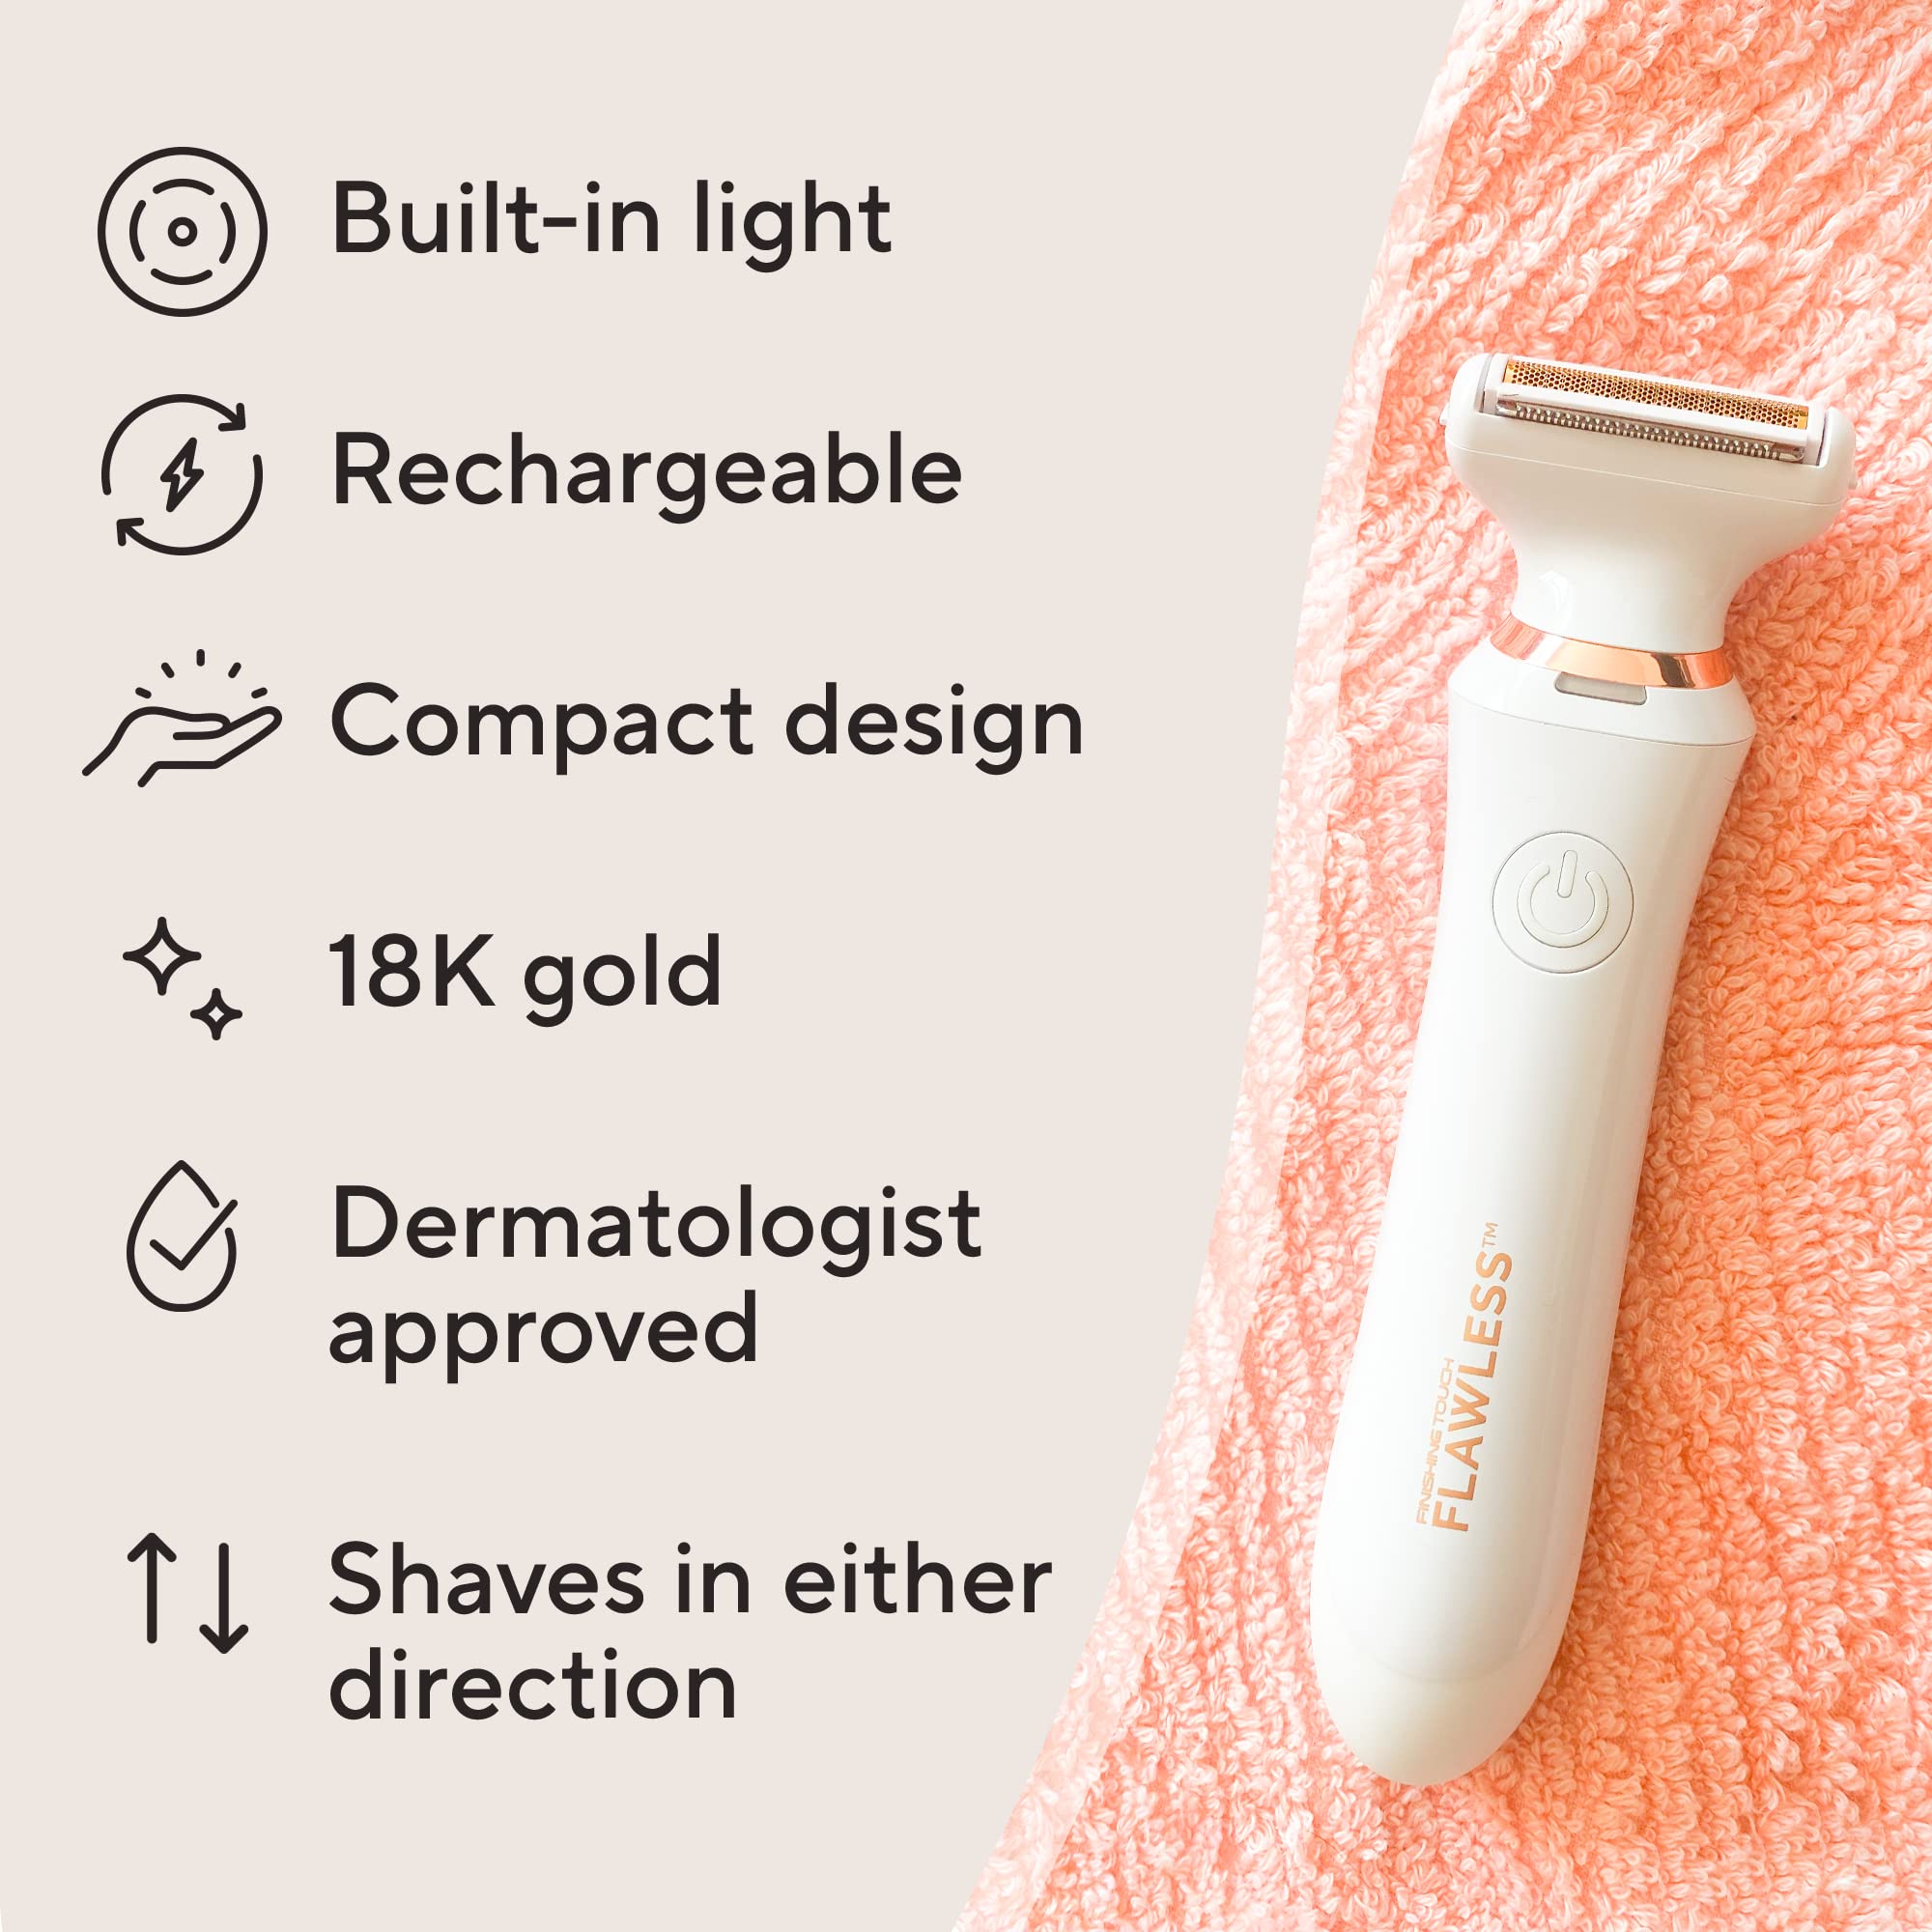 Finishing Touch Flawless Underarm Hair Removal Electric Razor Device, Designed to Shave and Contour Womens Sensitive Underarm Area, Cordless Groomer, Painless for All Skin Types